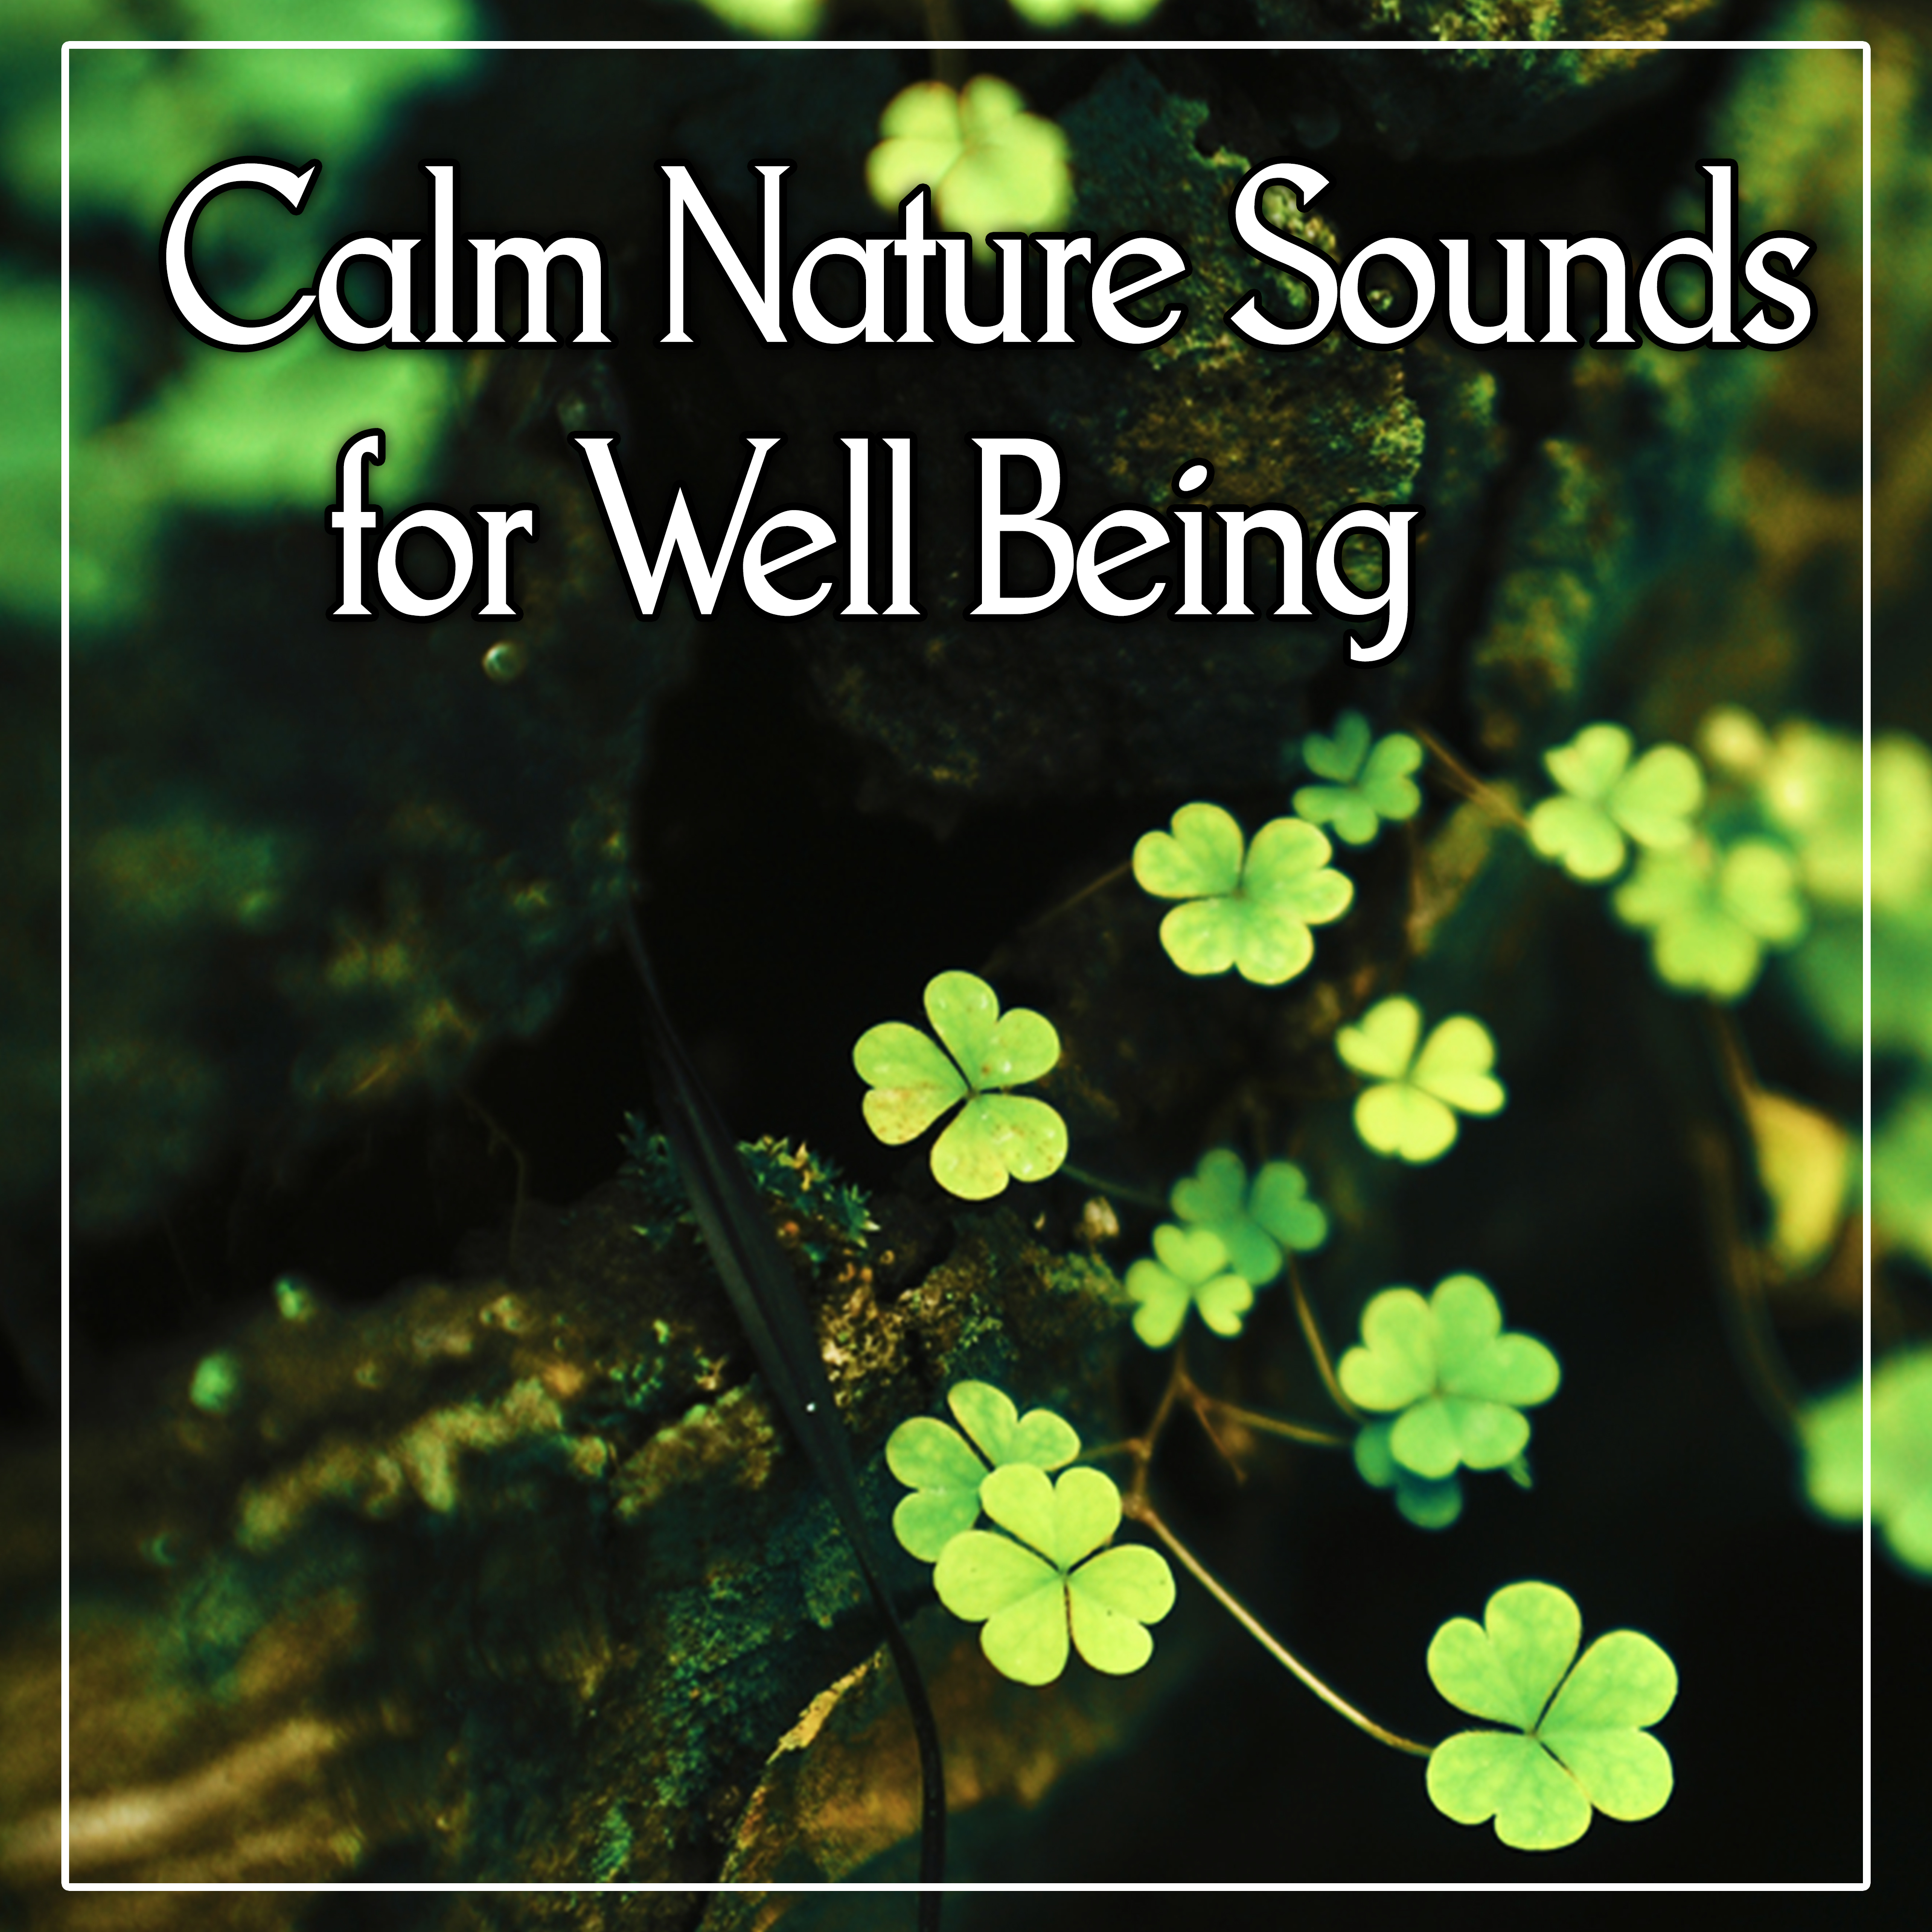 Calm Nature Sounds for Well Being - Yoga Music, Meditation, Relaxation, Serenity Spa, Deep Sleep, Massage & Inner Peace